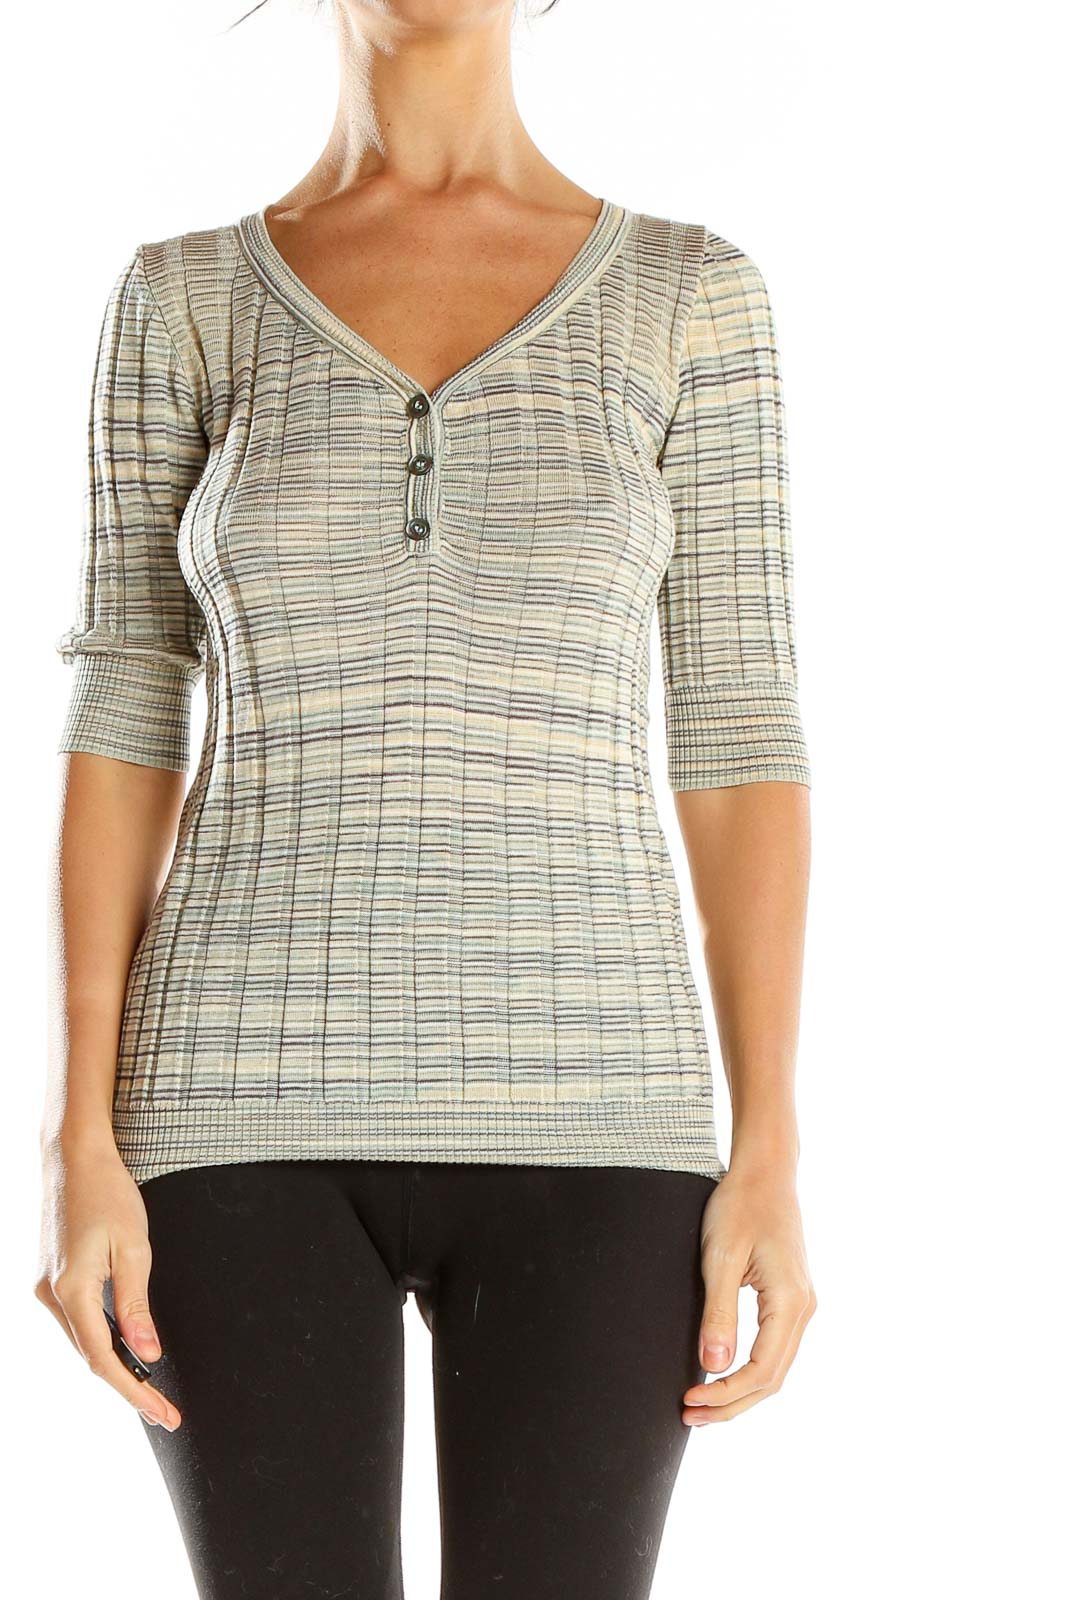 Gray Textured Fitted Top Front